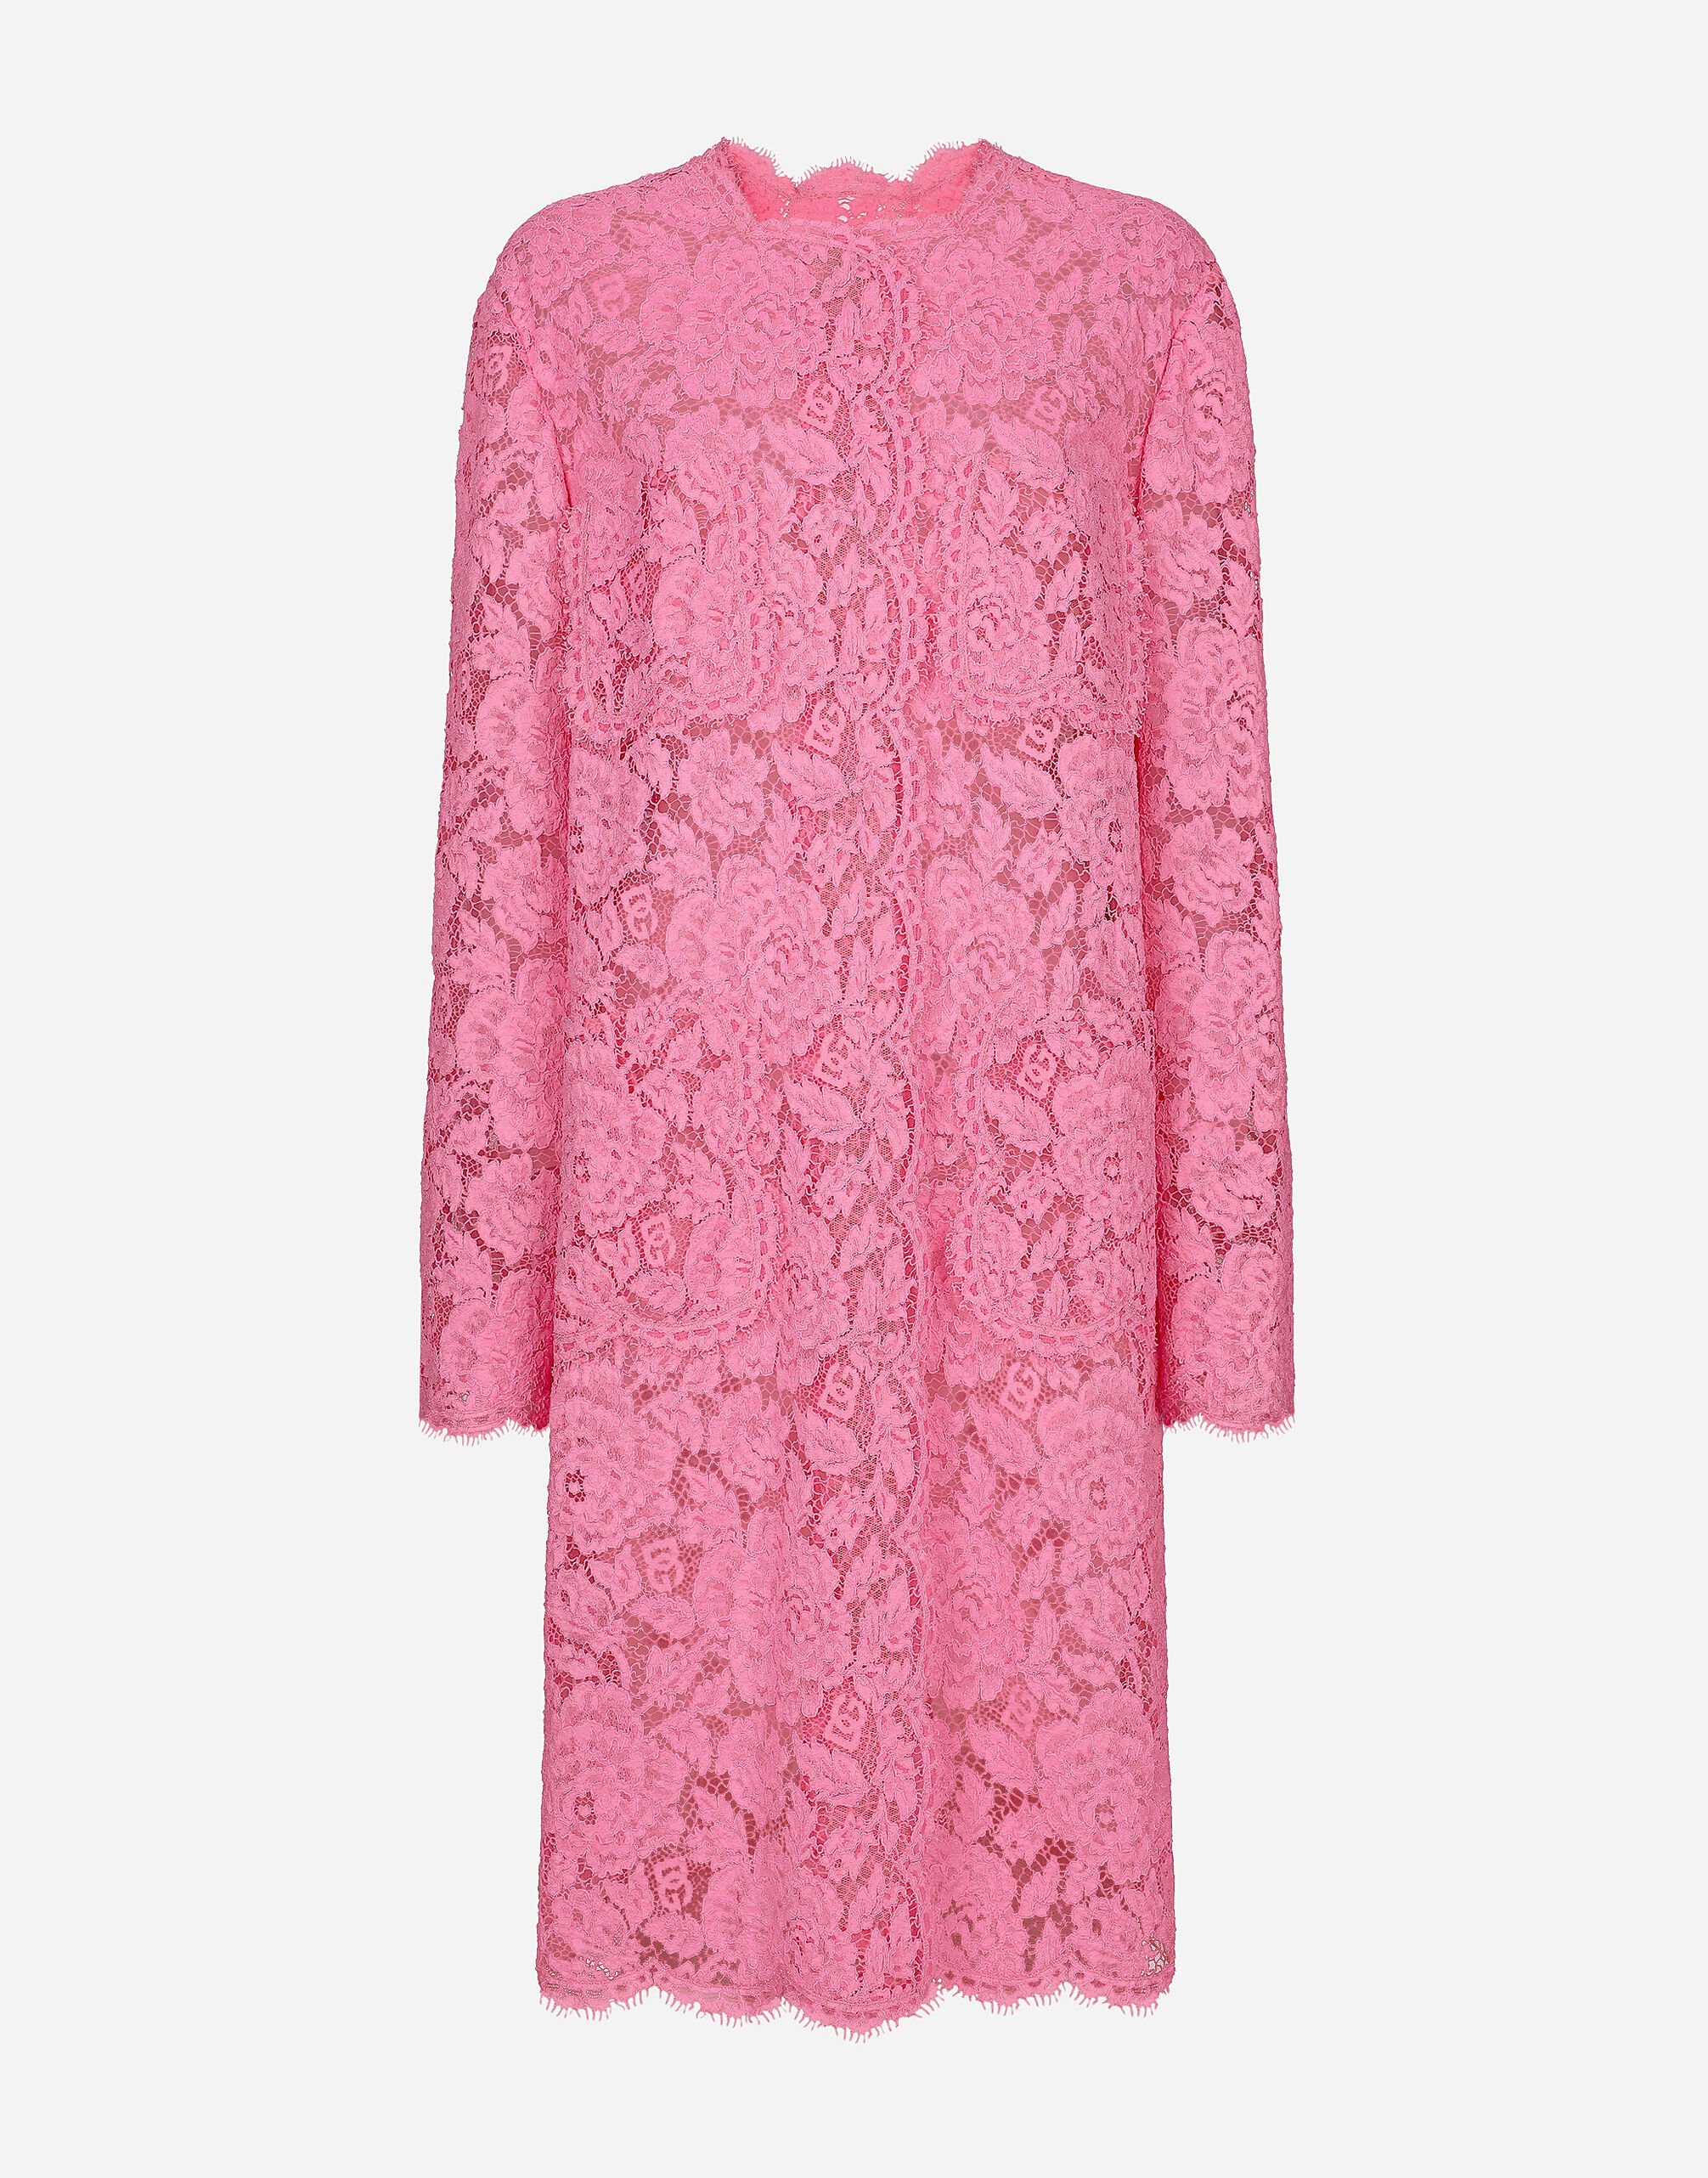 Dolce & Gabbana Branded floral cordonetto lace coat Pink F79DATFMMHN